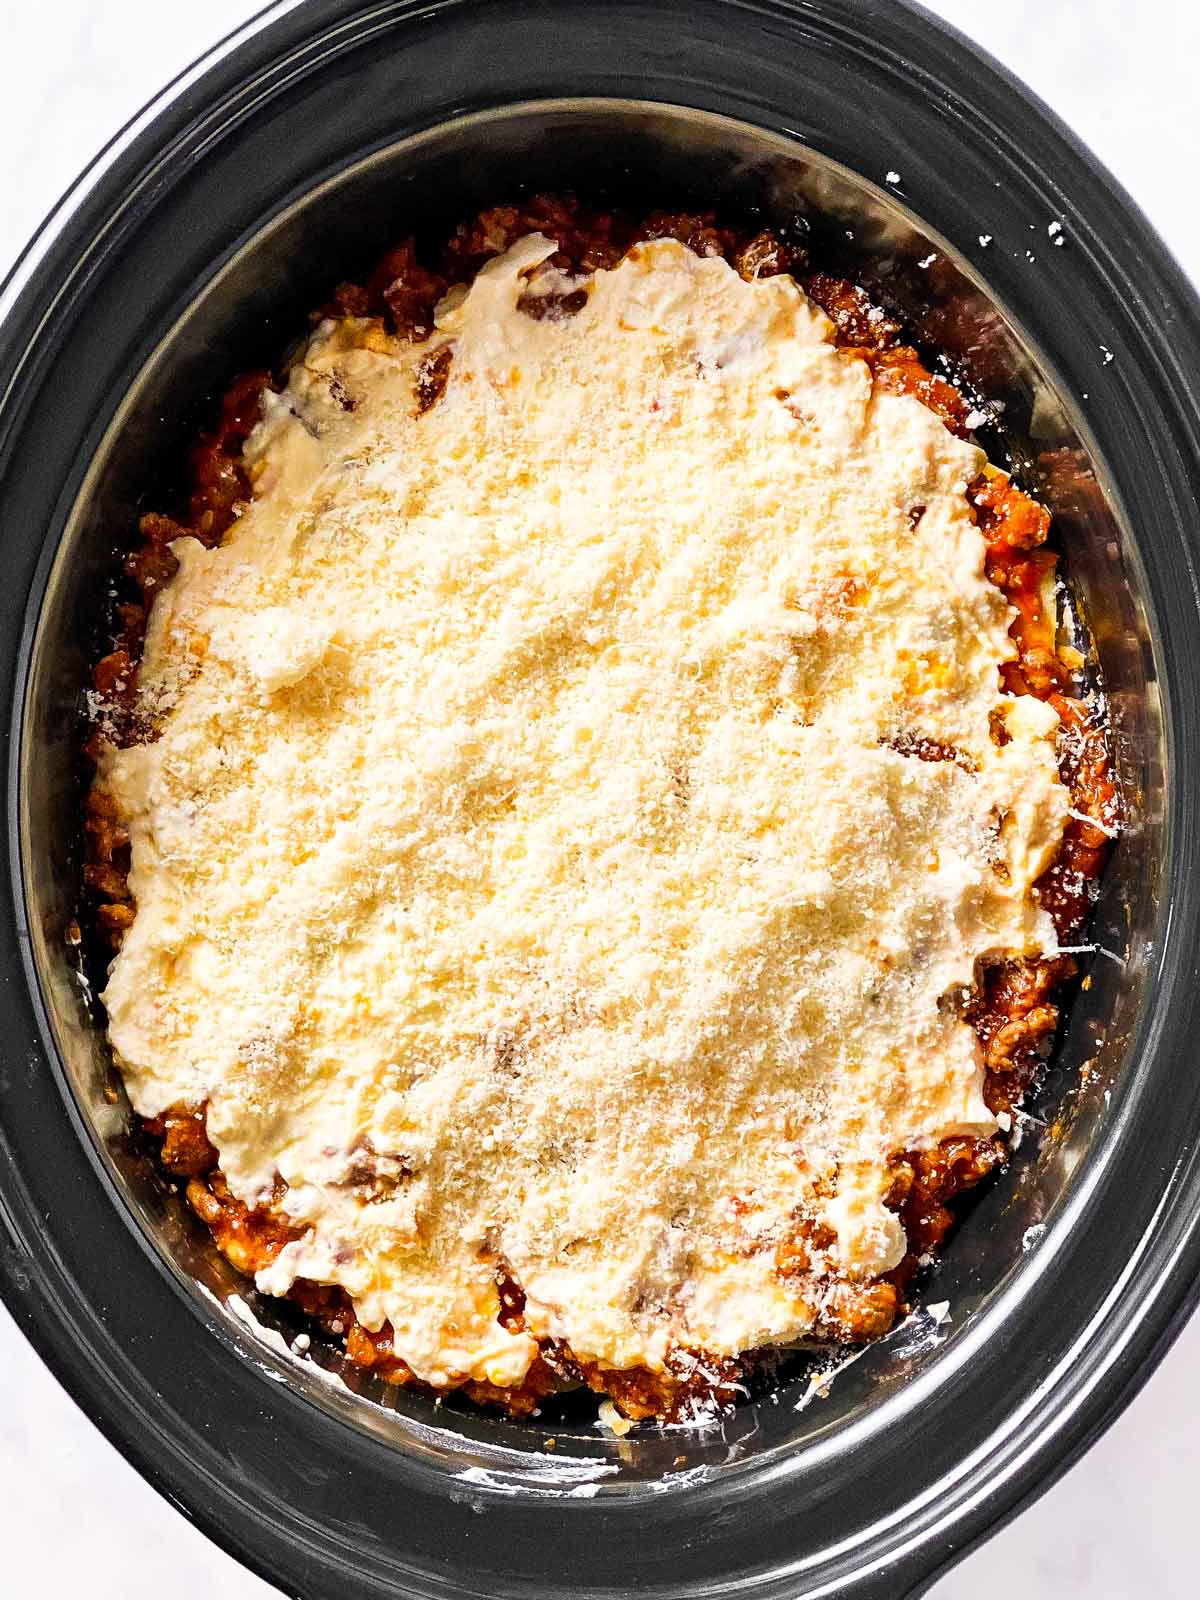 grated parmesan cheese on top of ricotta sauce in black crock